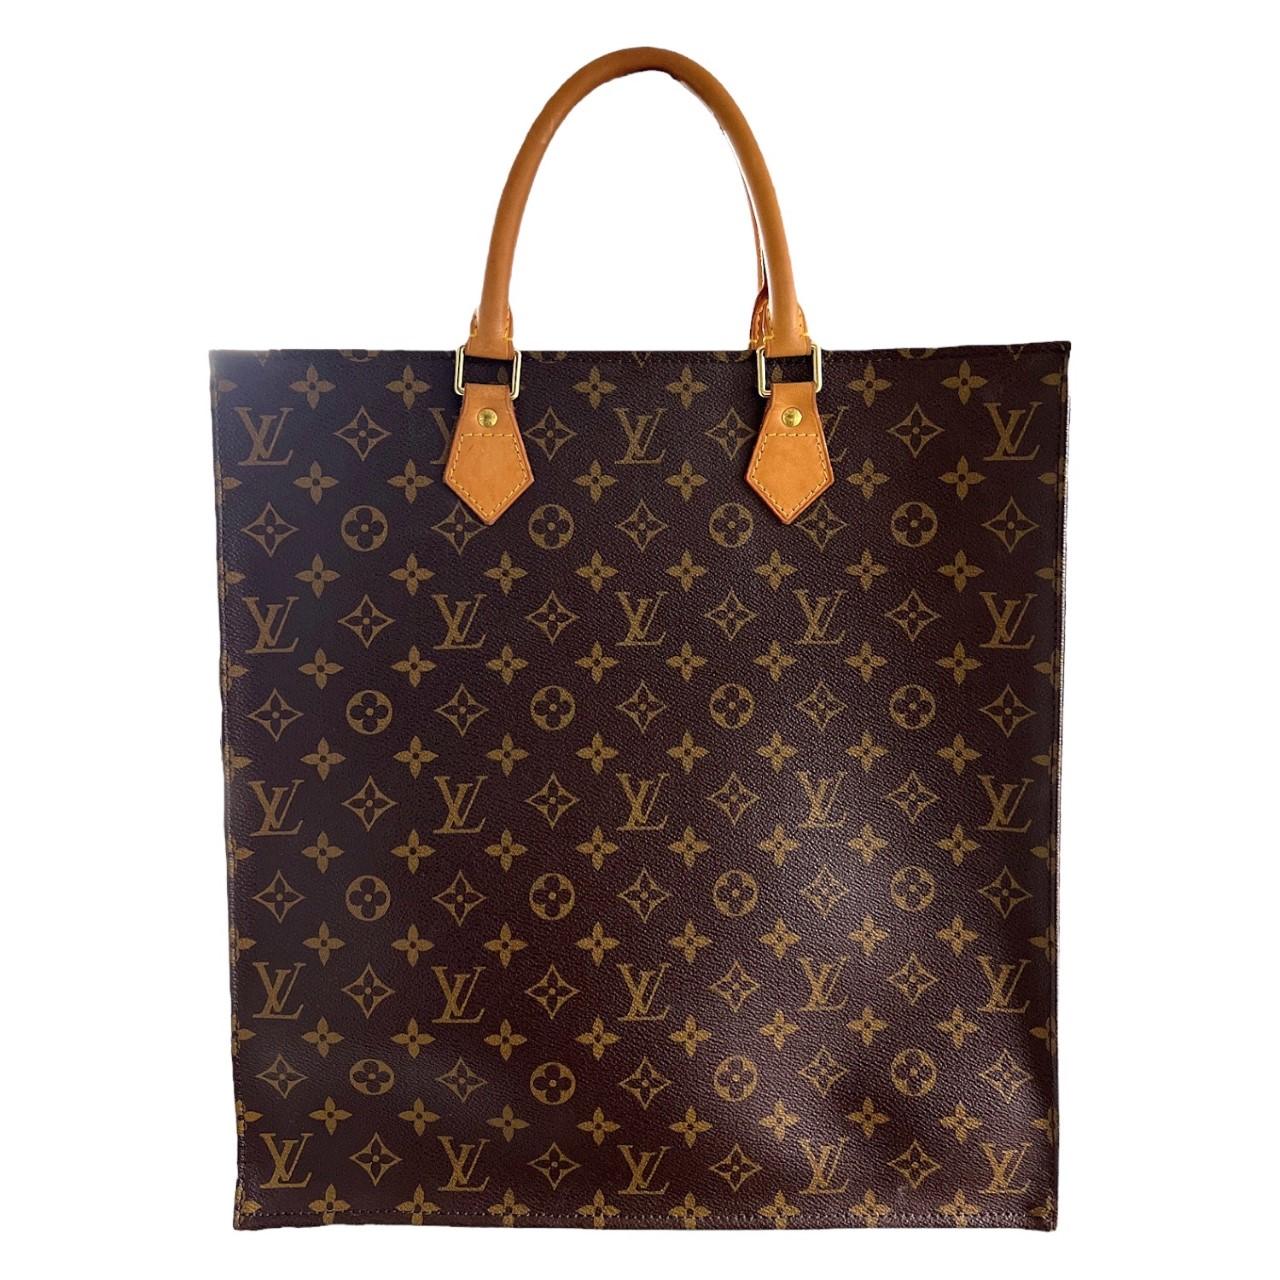 We are offering this classy Louis Vuitton Monogram Sac Plat Tote. It is crafted of the classic brown Louis Vuitton monogram canvas, with signature vachetta cowhide leather top handles, and brass hardware. The top is open to a beige leather interior.